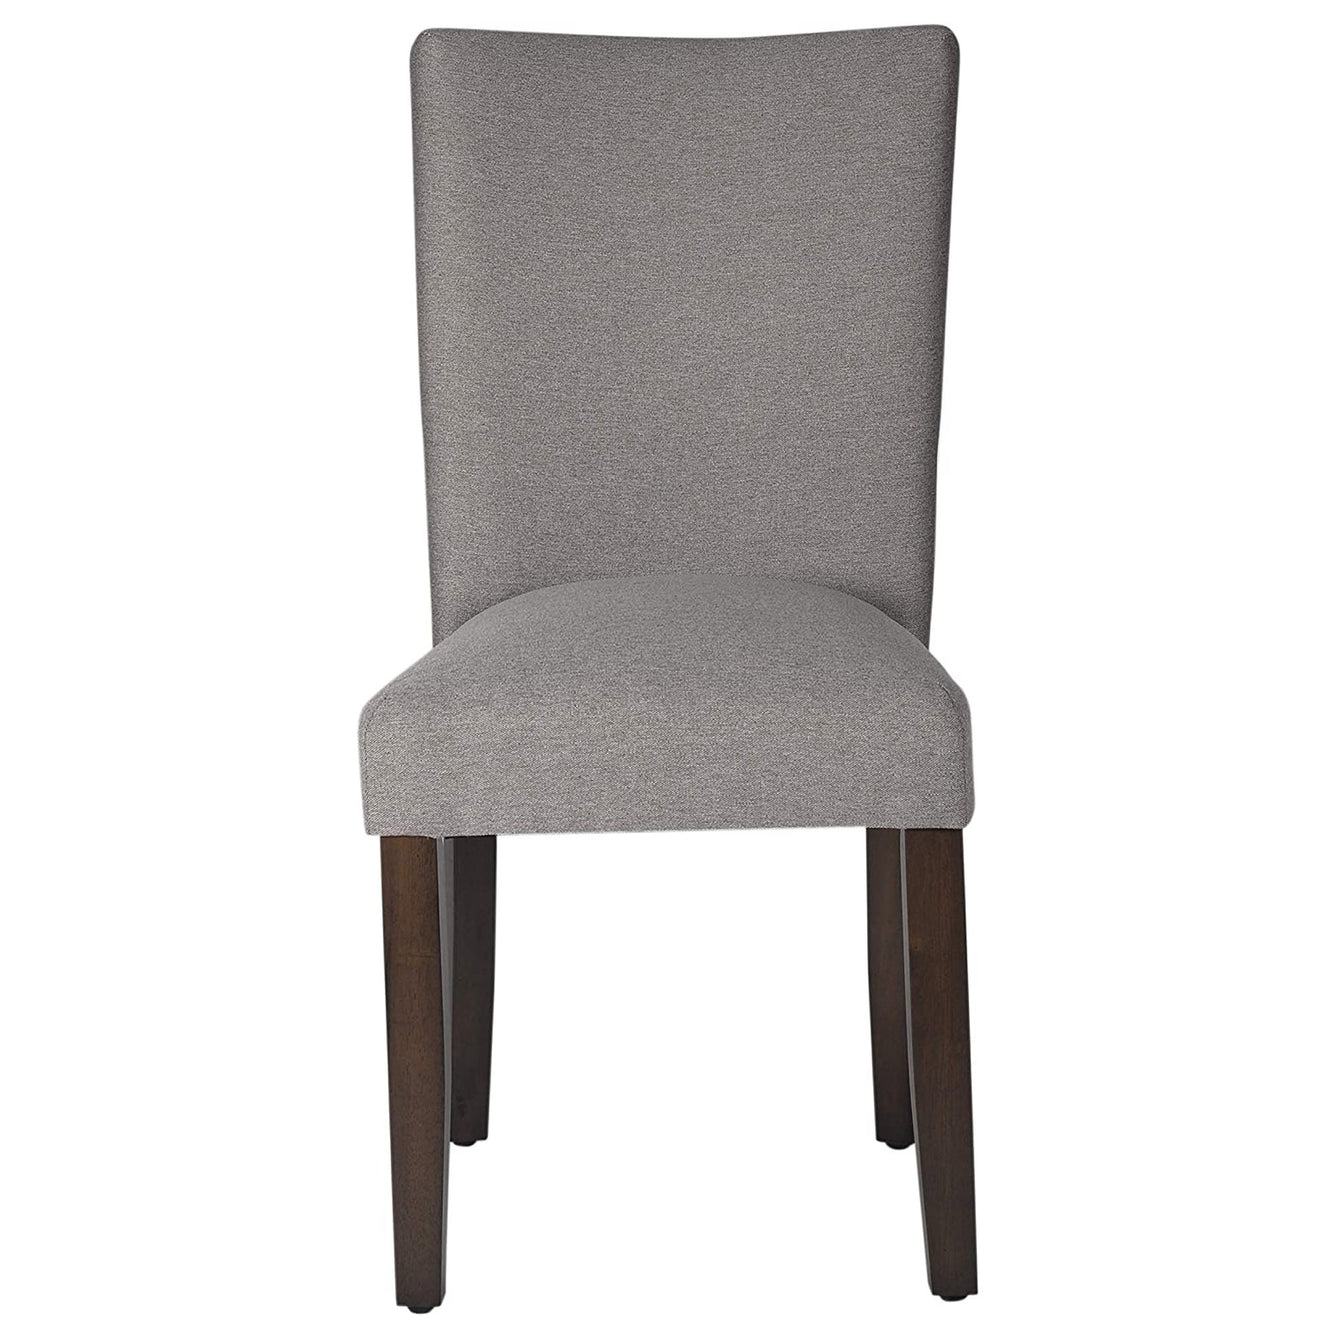 Light Grey Full Back Solid Wood Dining Chair